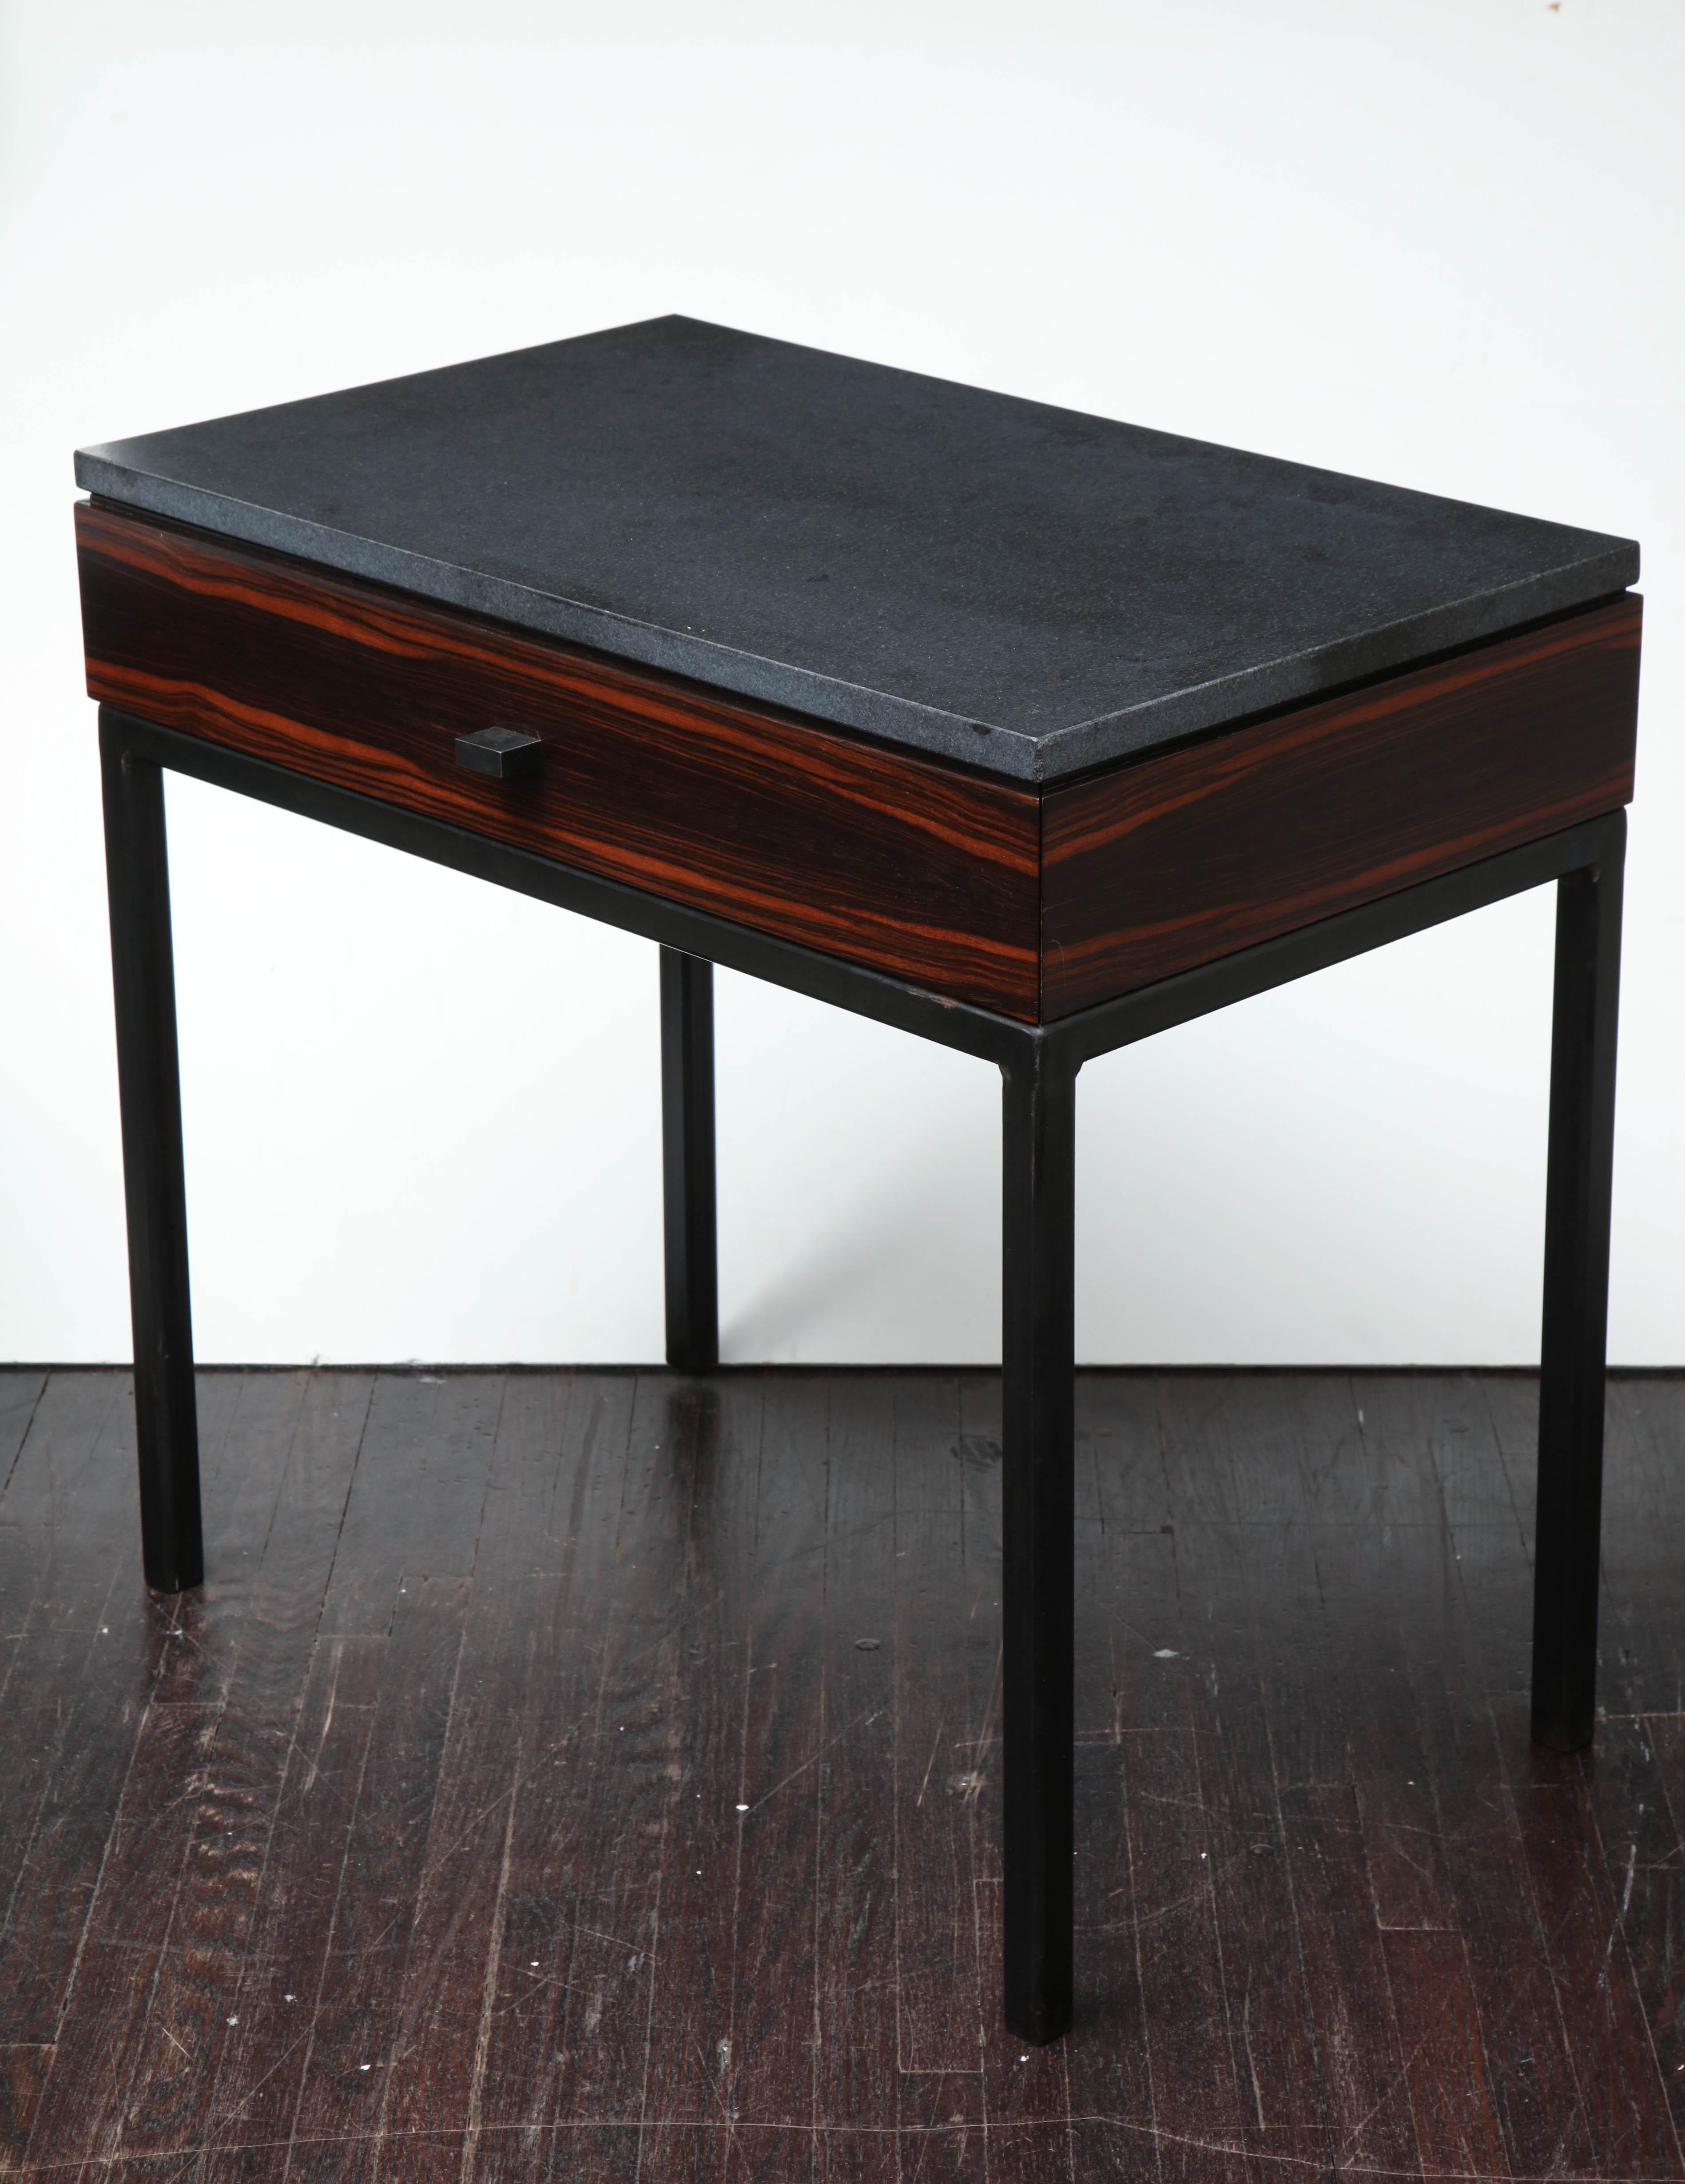 Beautifully composed with Macassar ebony wood drawer and blackened steel legs.